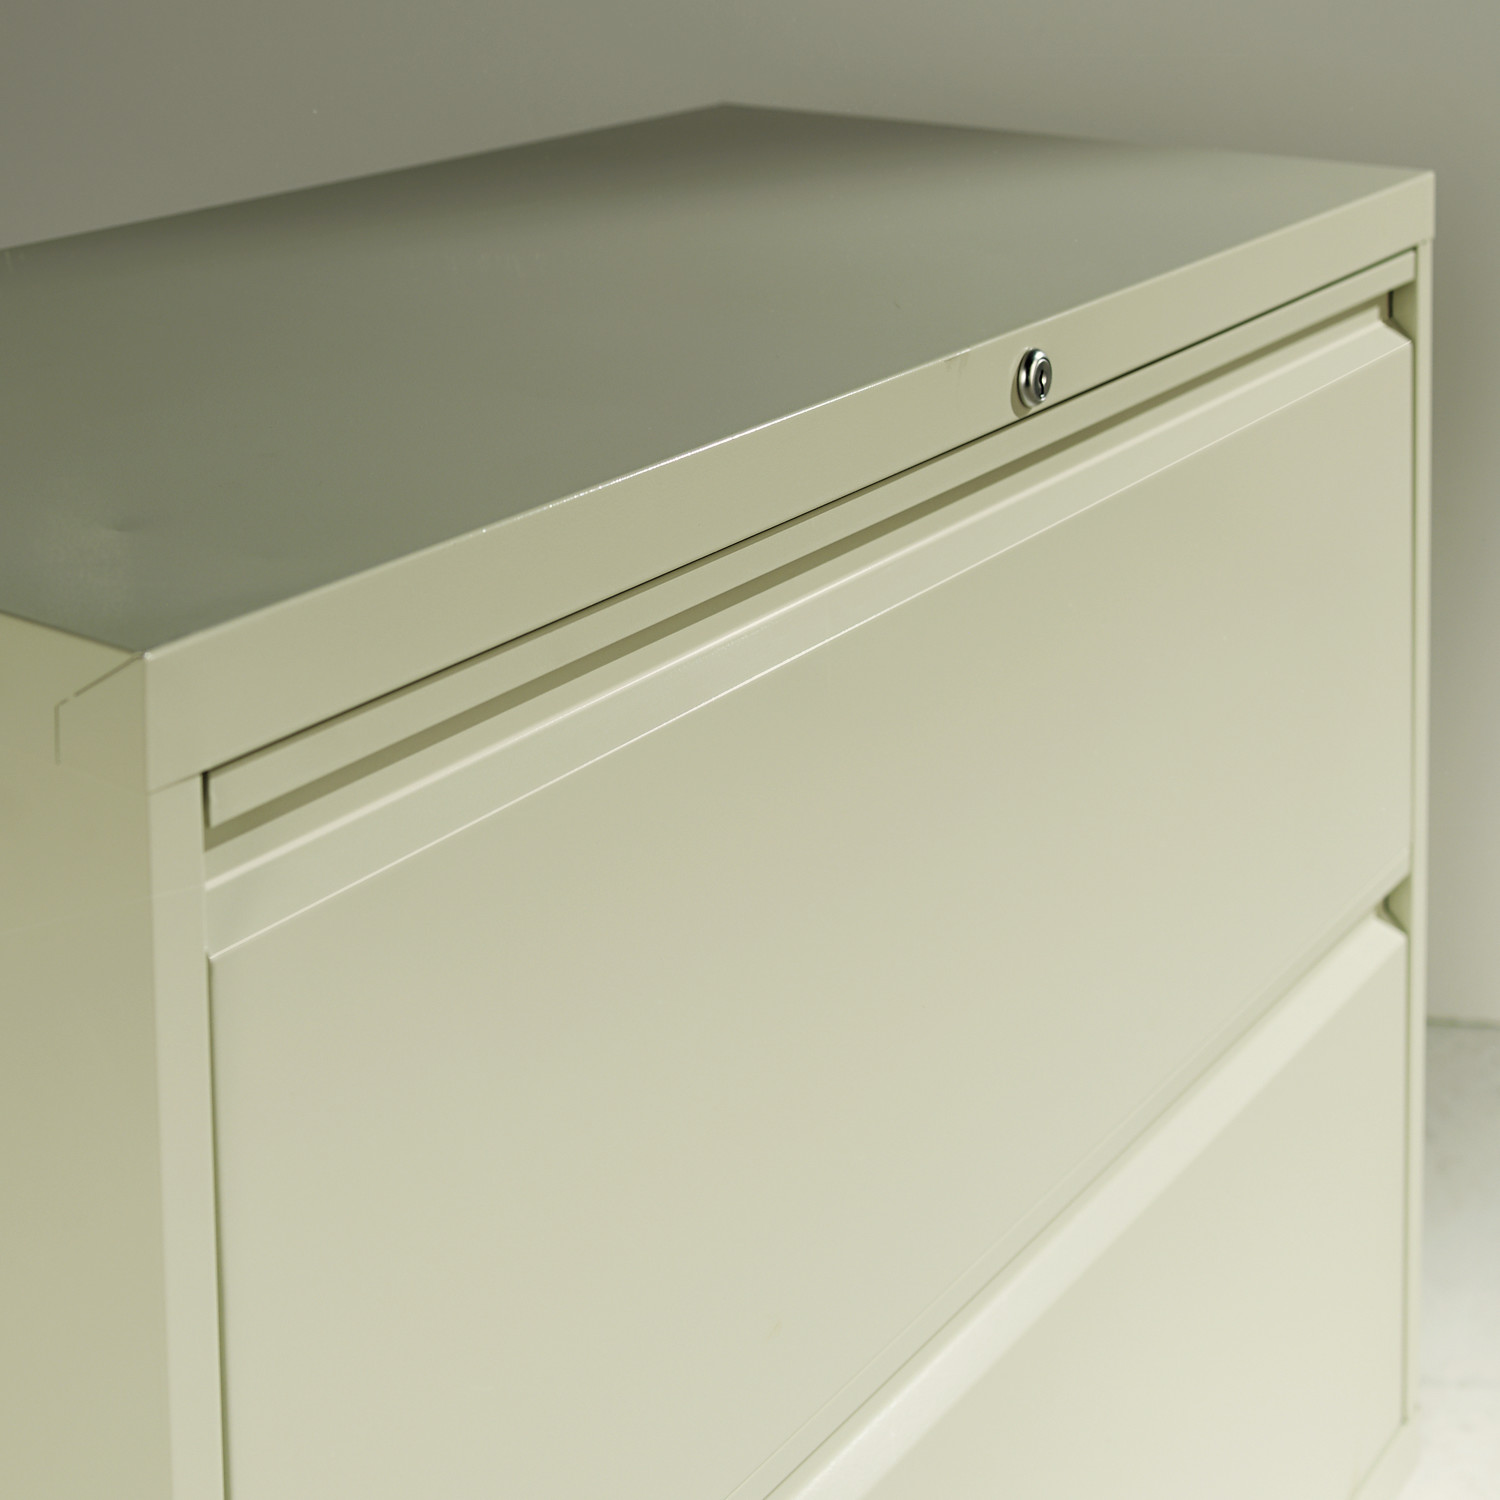 Alera 4 Drawers Lateral Lockable Filing Cabinet, Gray - image 3 of 3